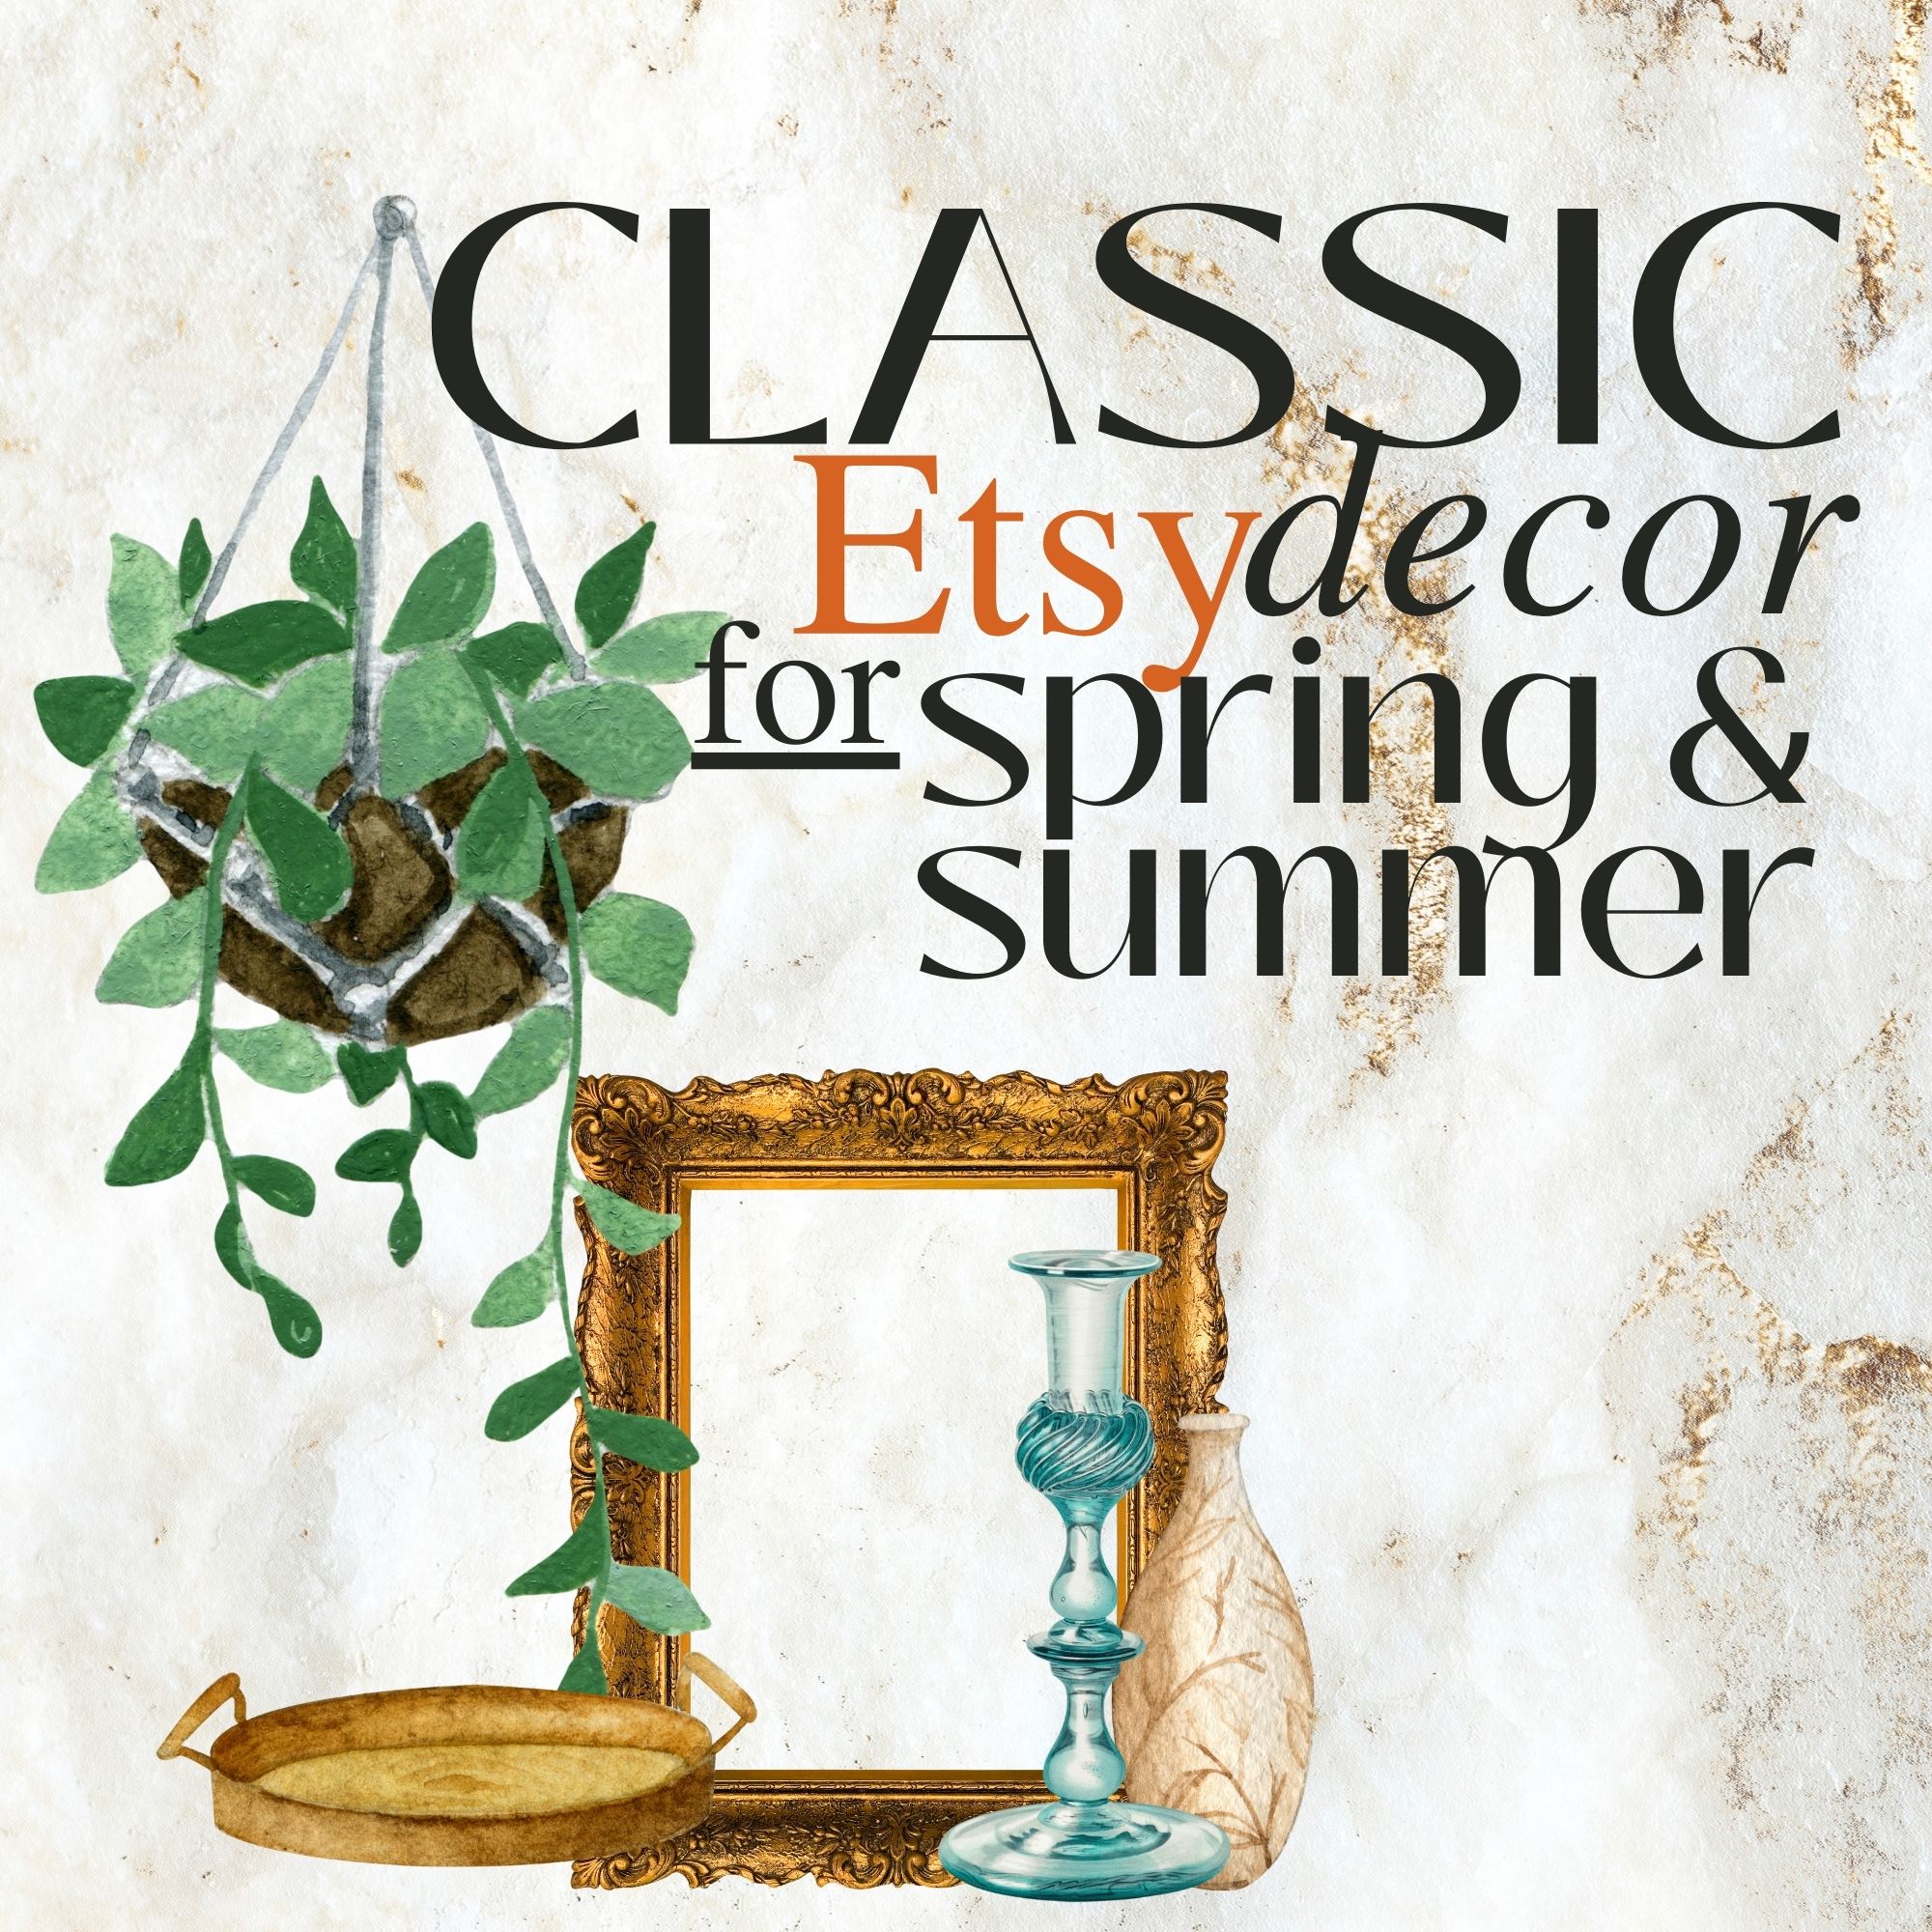 Classic Etsy Decor For The Spring & Summer Season